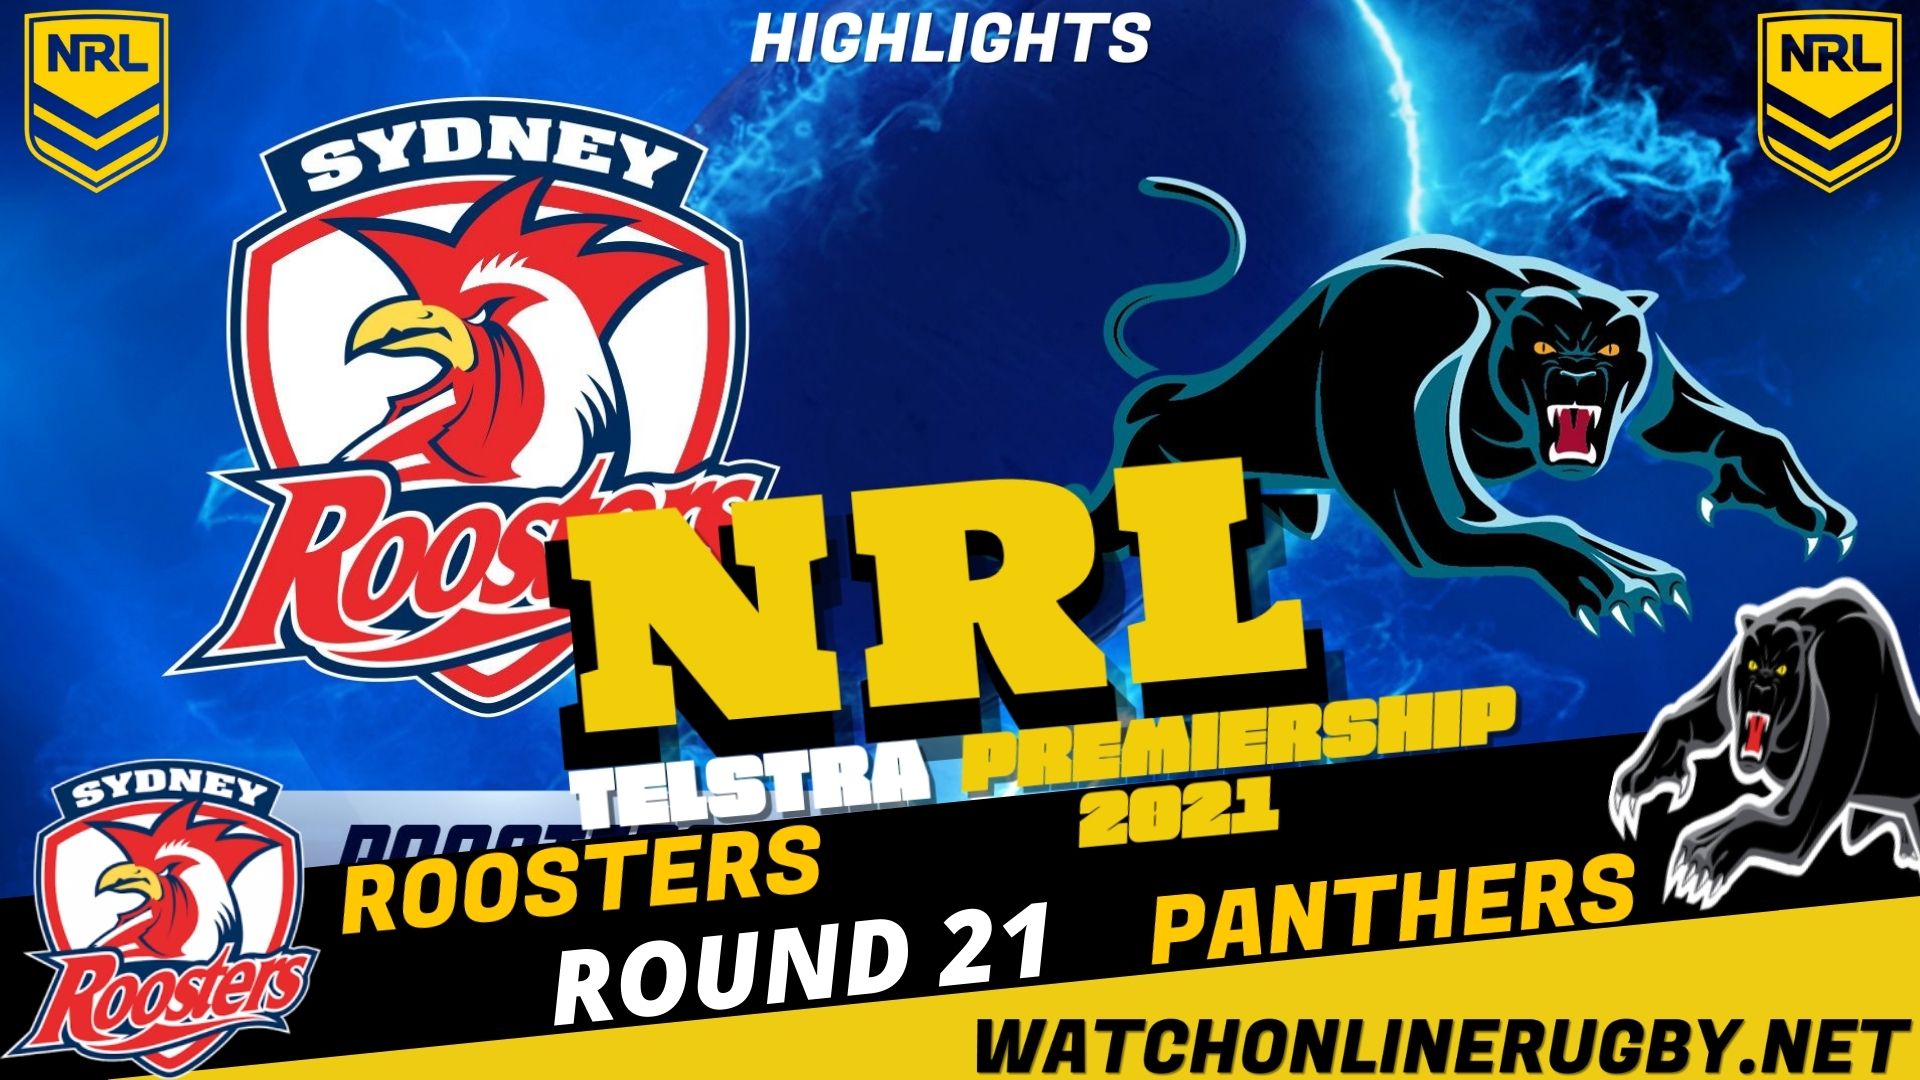 Roosters Vs Panthers Highlights RD 21 NRL Rugby